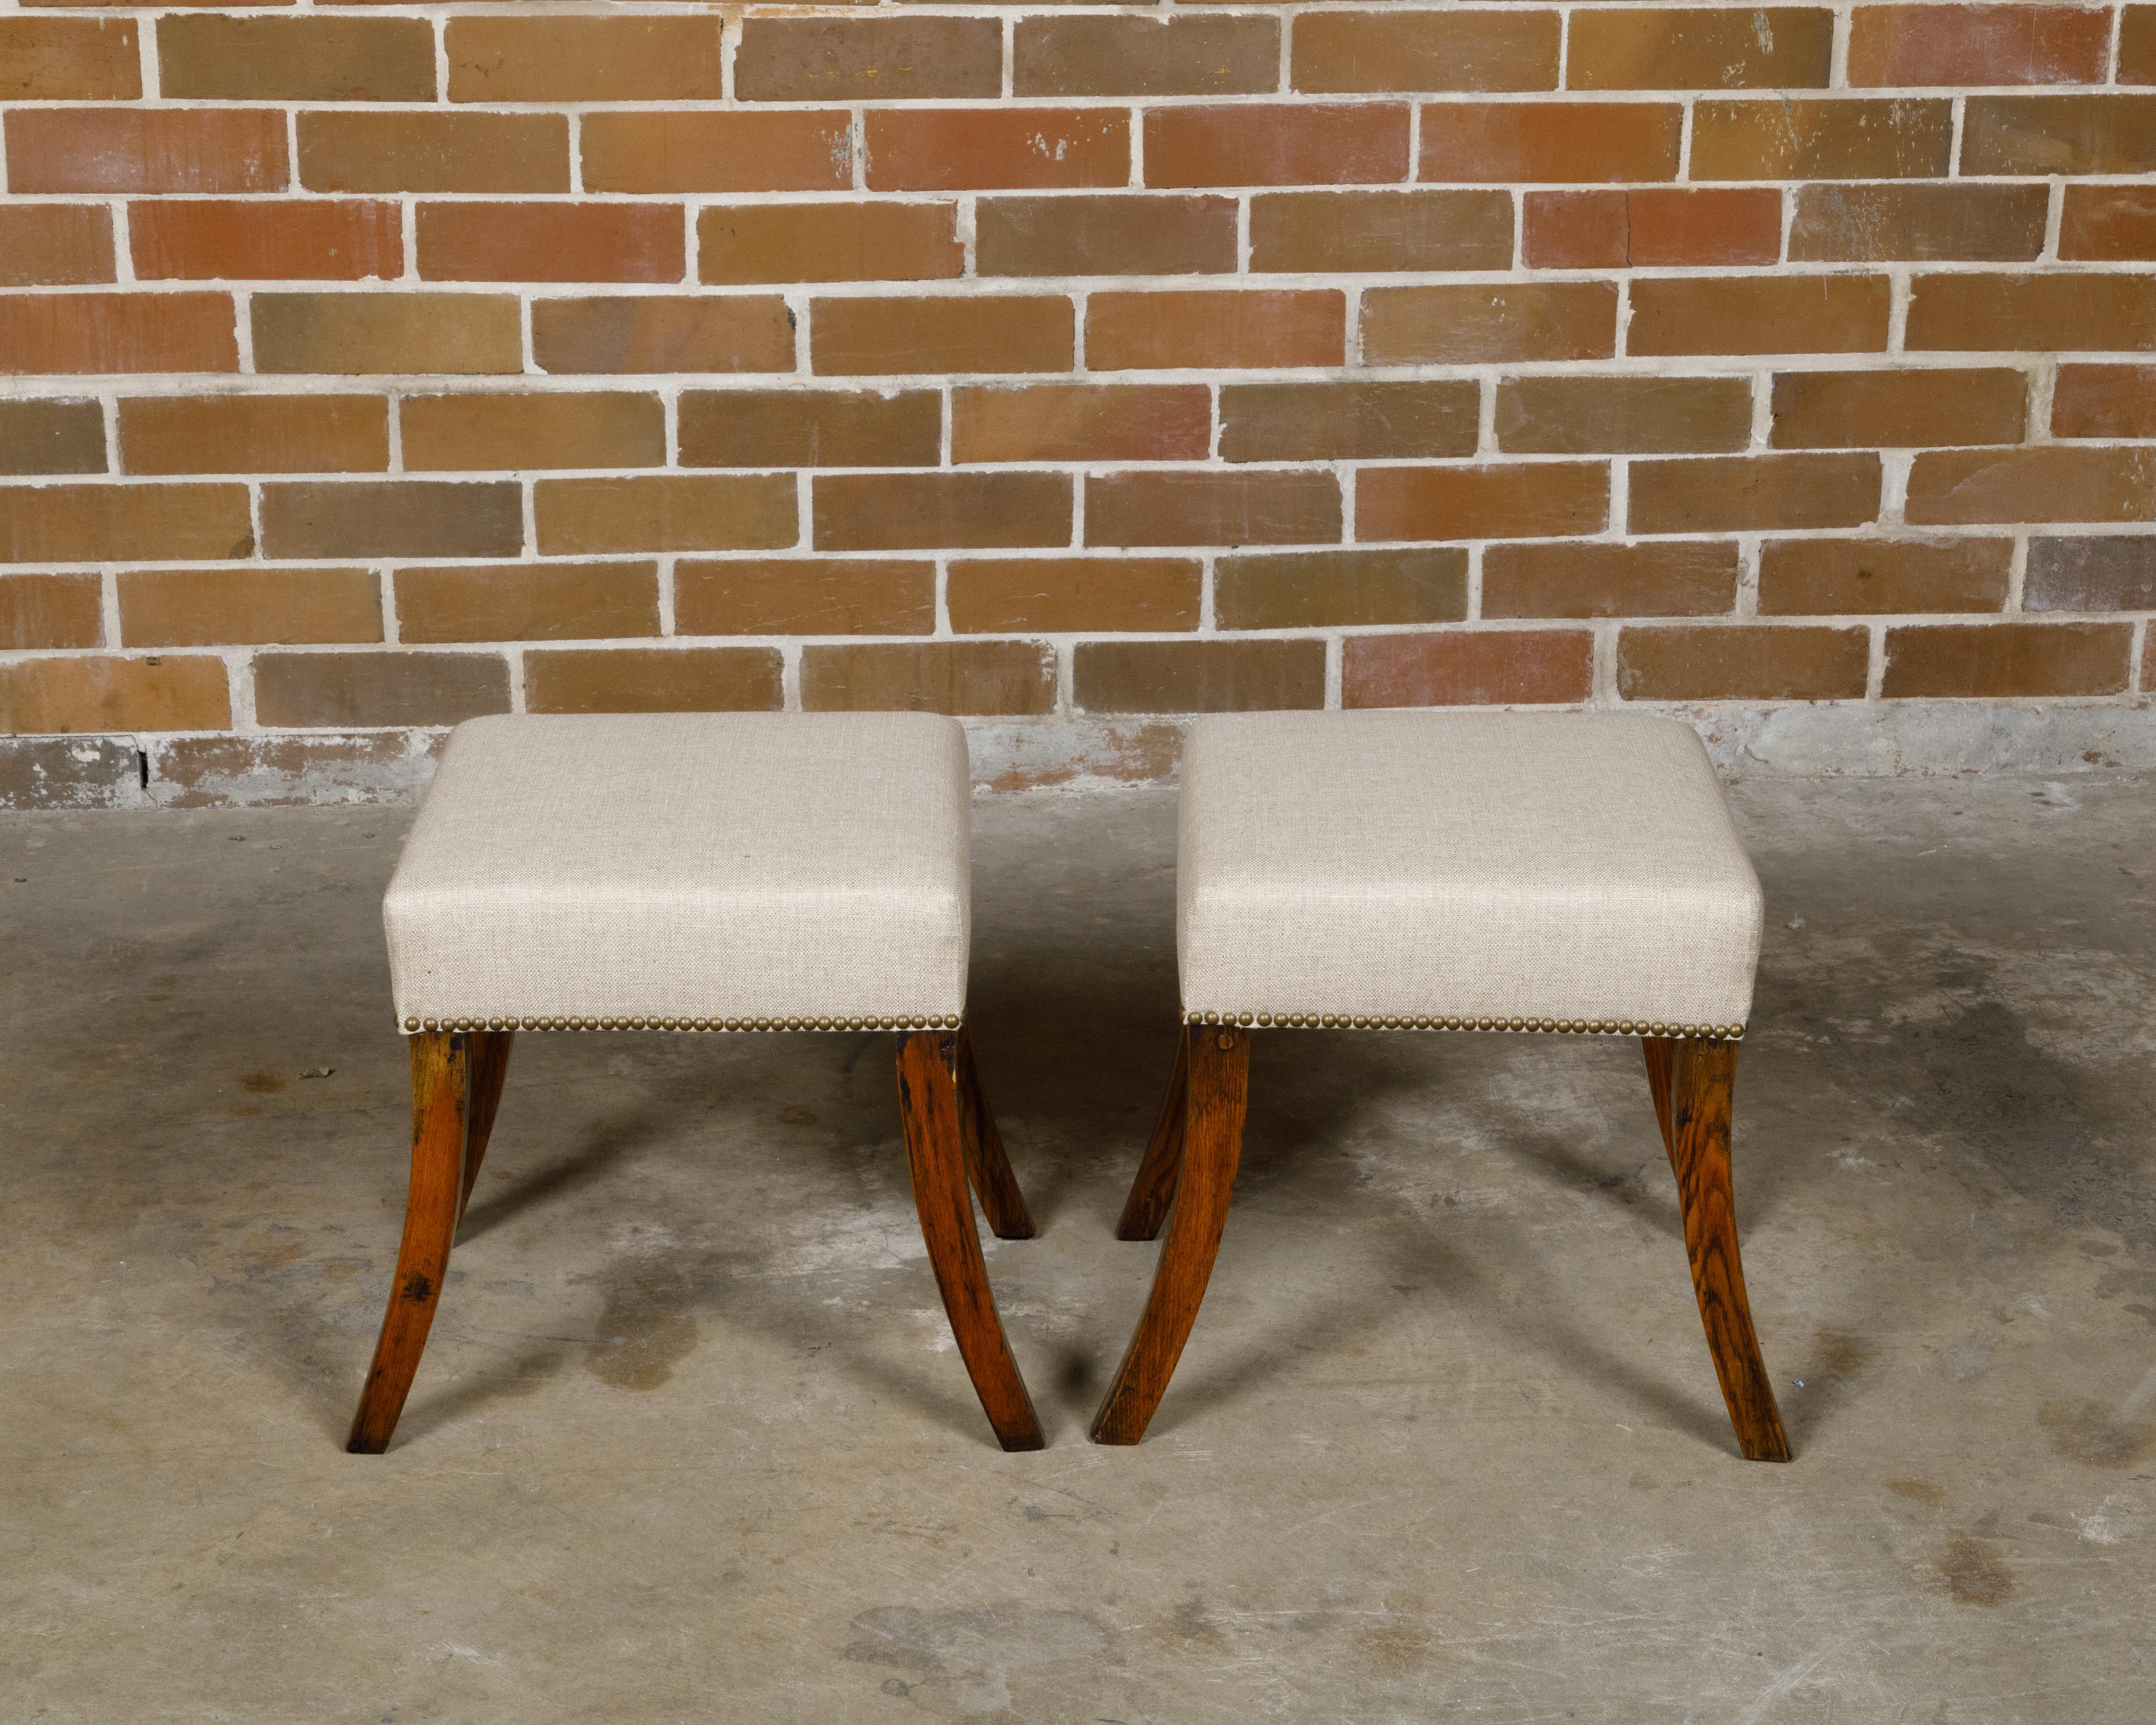 Pair of English 19th Century Oak Stools with Saber Legs and Custom Upholstery In Good Condition For Sale In Atlanta, GA